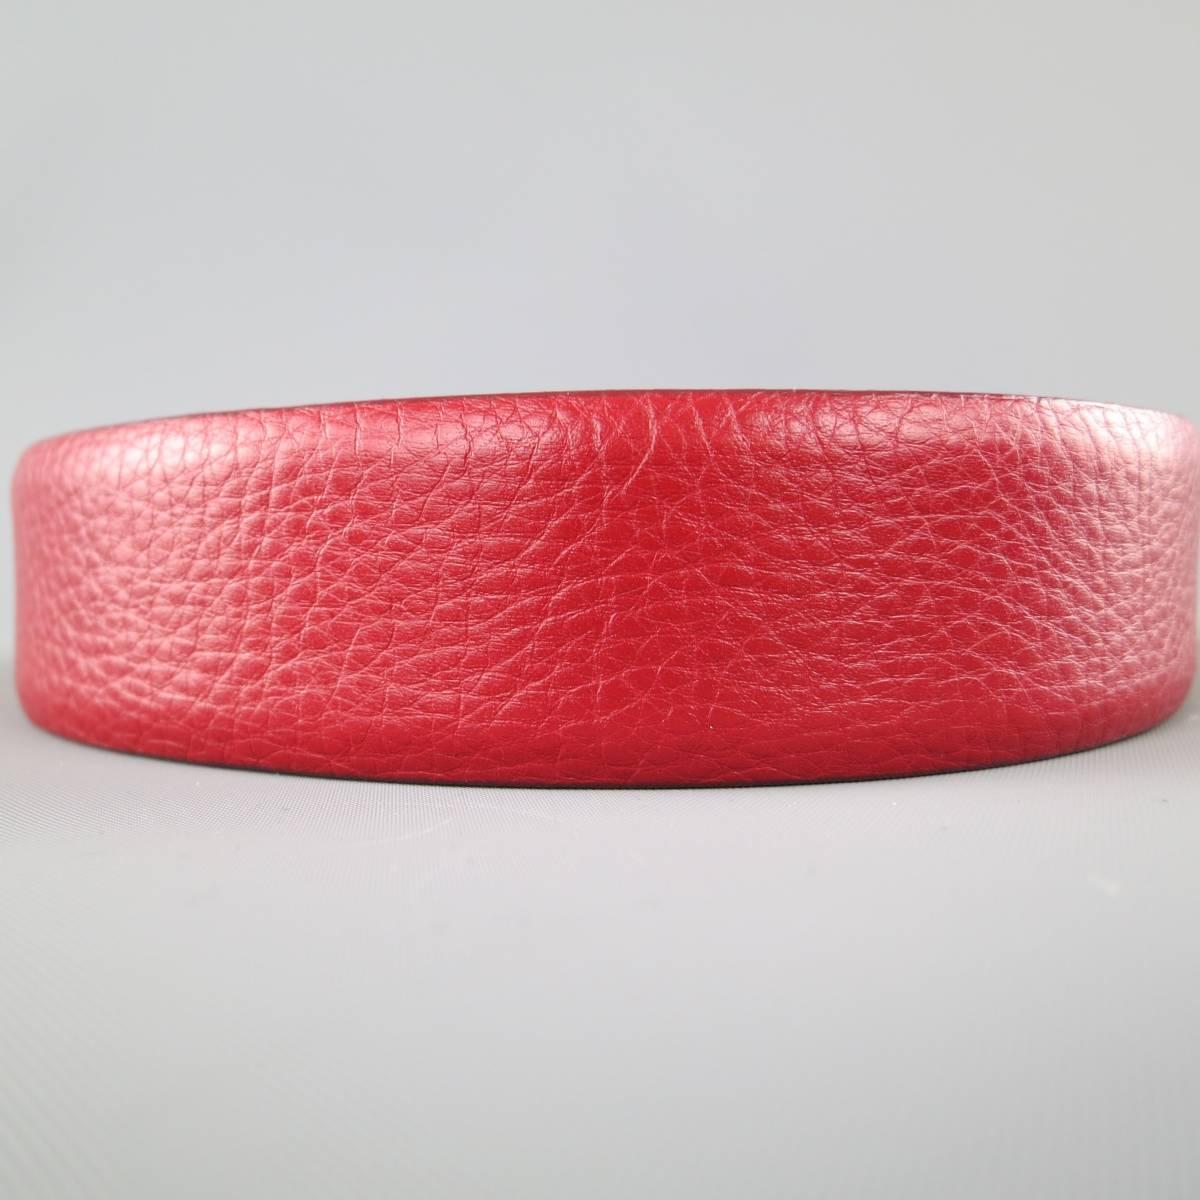 GIORGIO ARMANI dress belt features a deep red pebbled leather strap with a smoke silver tone, leather detailed, buckle. Made in Italy.
 
Excellent Pre-Owned Condition.
Marked: 50
 
Length: 41 in.
Width: 1.25 in.
Fits: 32.5-38.5 in.

SKU: 84646